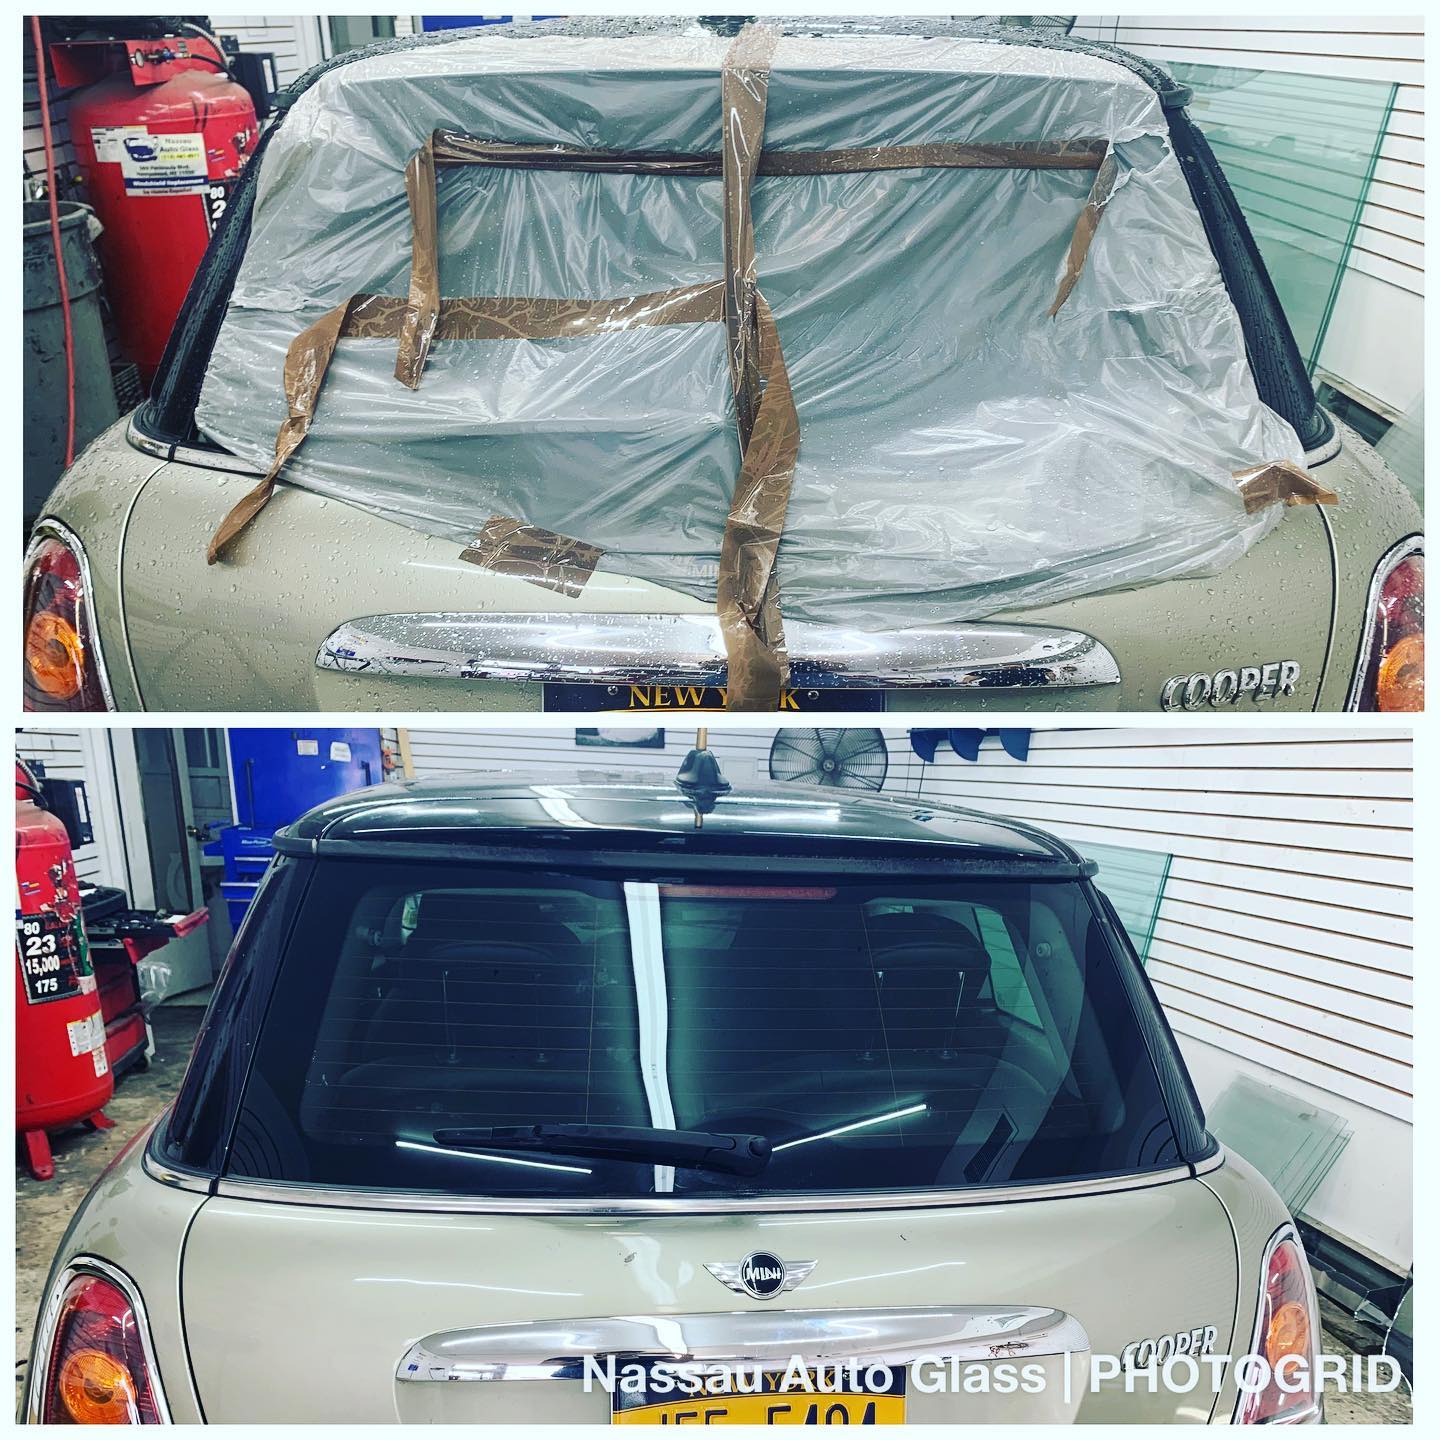 Nassau Auto Glass Services: Before & After Picture 16